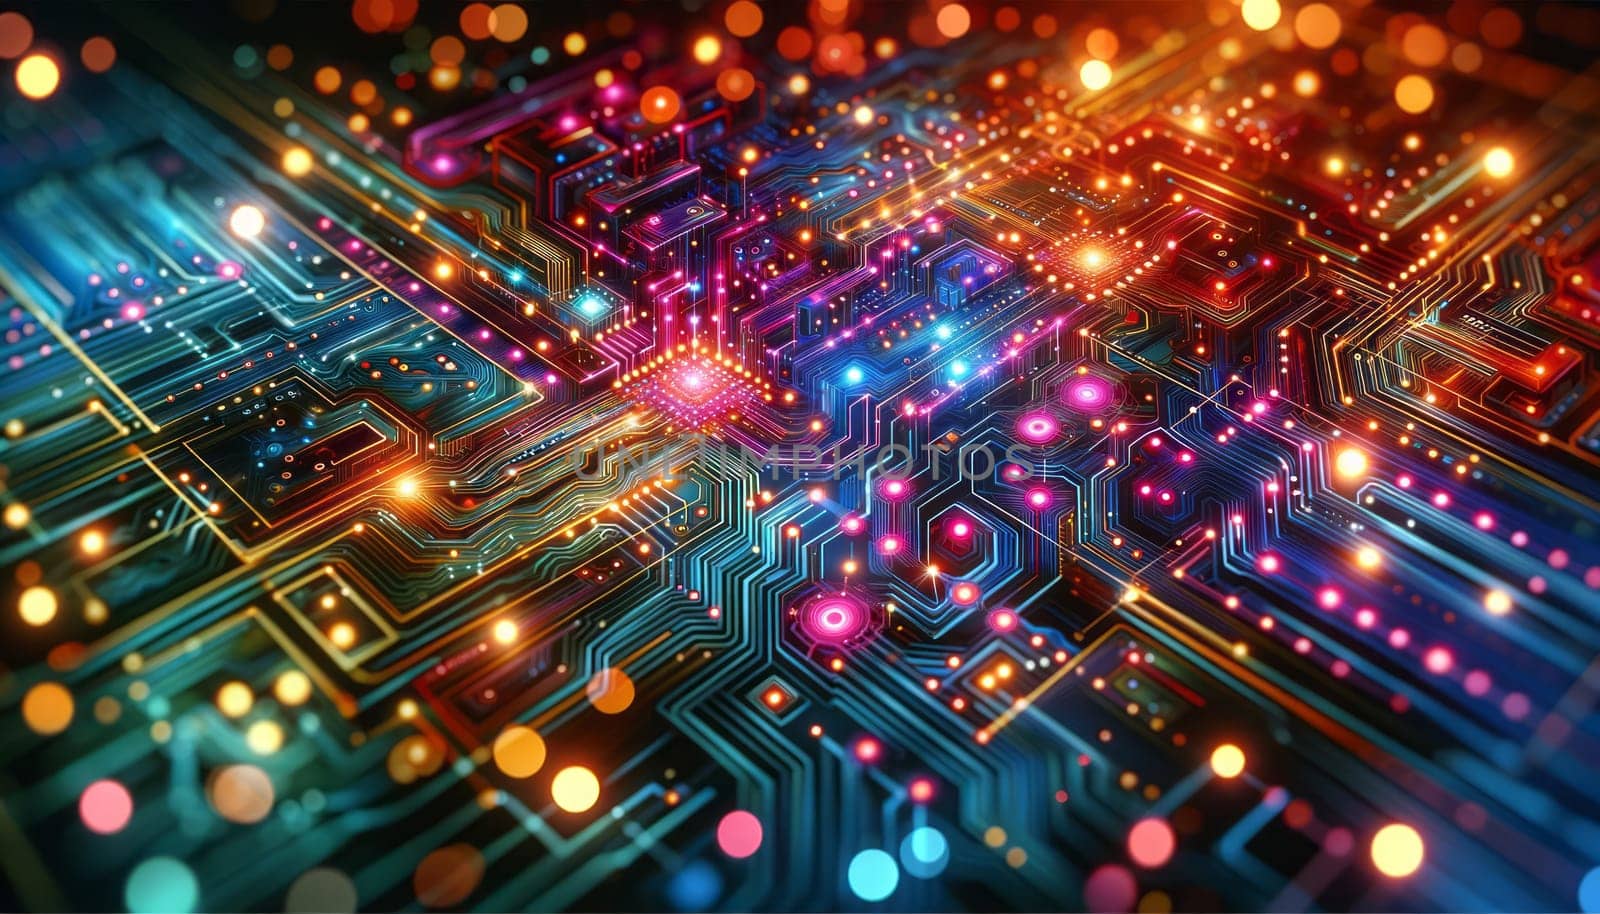 A digital illustration of a vibrant circuit board with a complex array of electronic components. The image features a mixture of warm and cool tones with glowing neon accents, highlighting the pathways and nodes on the board. The intricate pattern of the circuitry is composed of lines and geometric shapes that form a network, with bokeh light effects simulating activity and energy flow within the system.